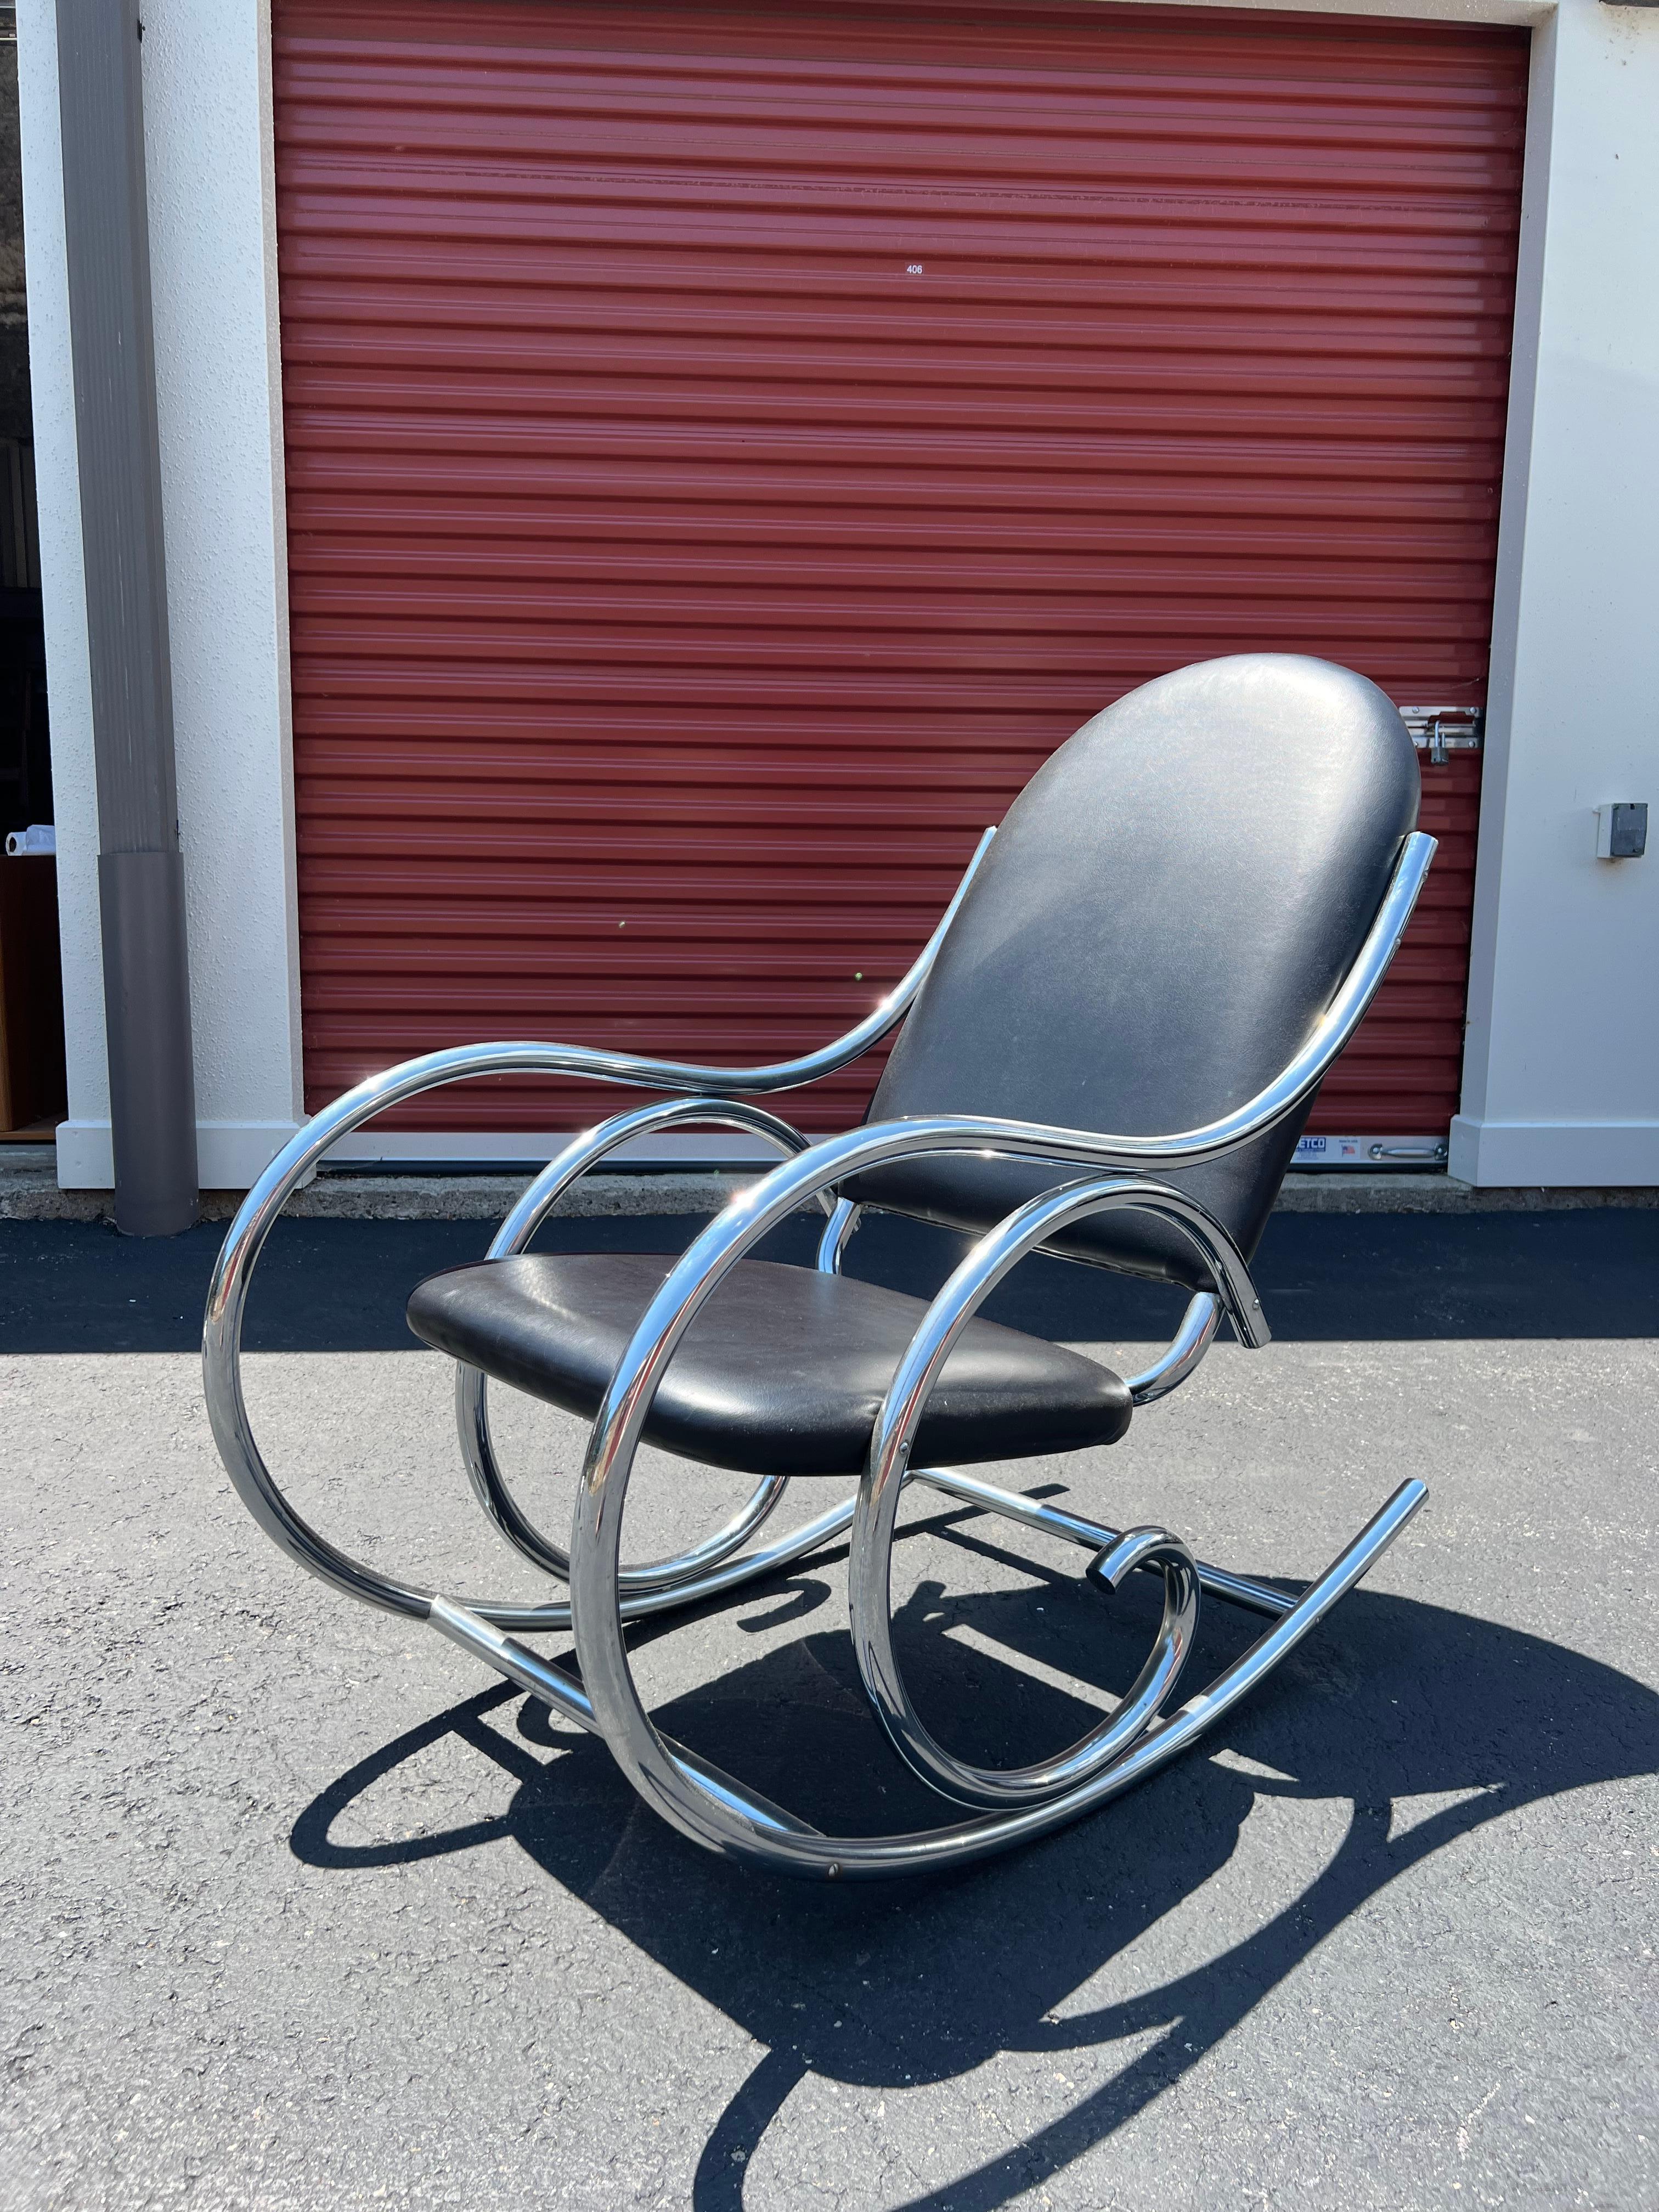 Mid-Century Modern rocking chair with curved chrome and original black Naugahyde. The chrome base and upholstery are in good condition overall - only light scuffing and scratching.